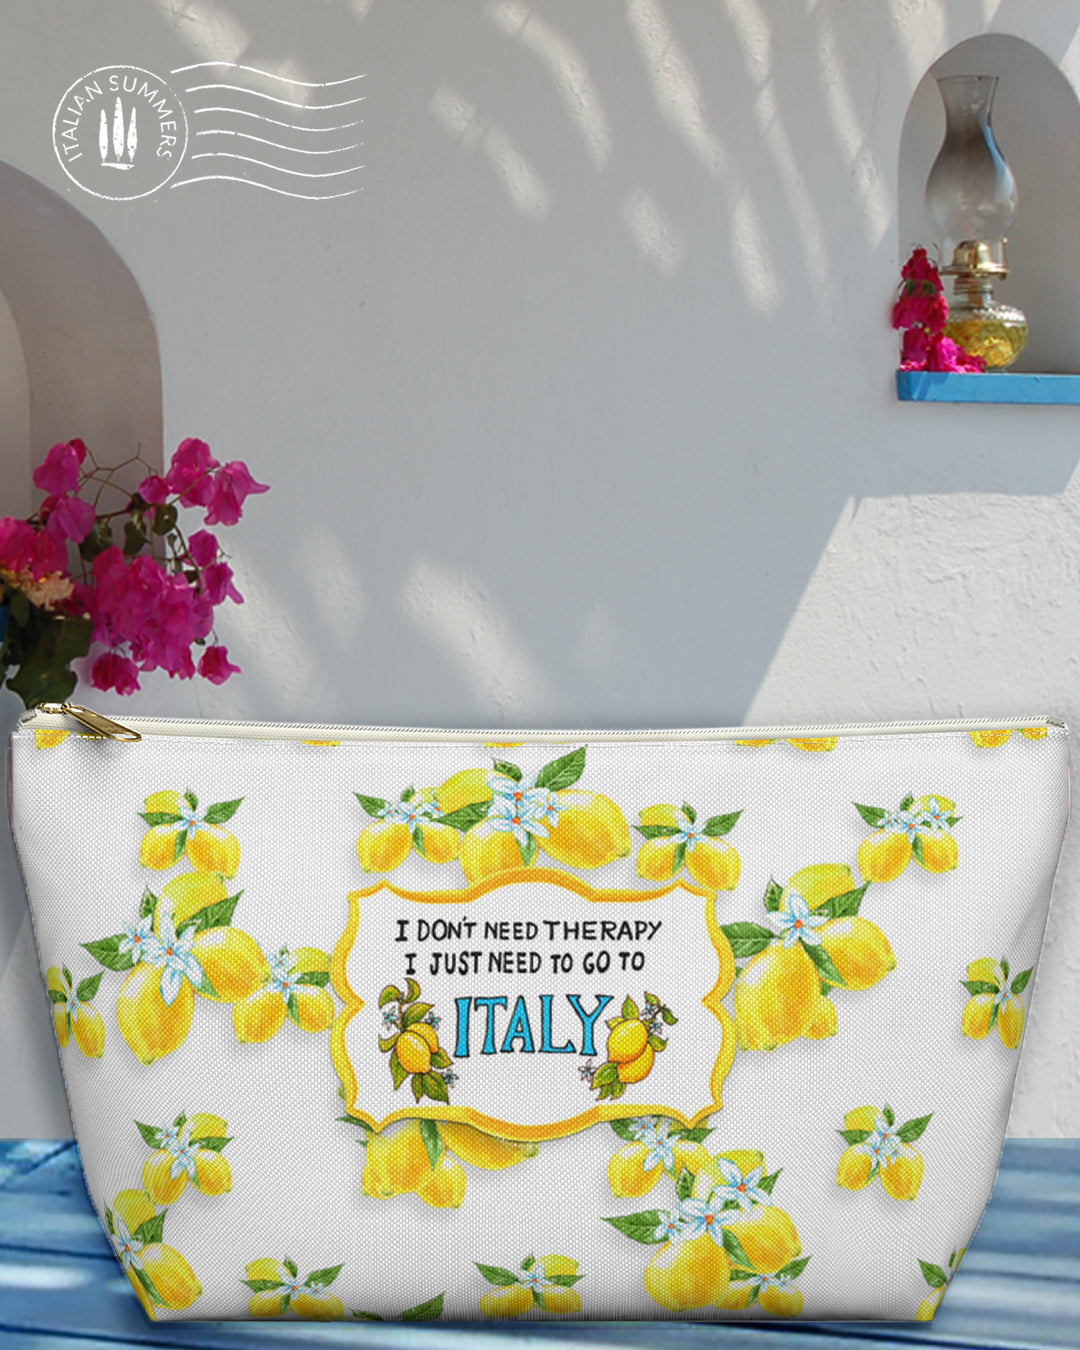 Clutch THERAPY-LEMON Pattern! This one-of-a-kind Italian-inspired clutch features a fun, sun-drenched lemon pattern that stands out, plus the delightful quote "I don't need therapy, I just need to go to Italy" by Italian Summers. 